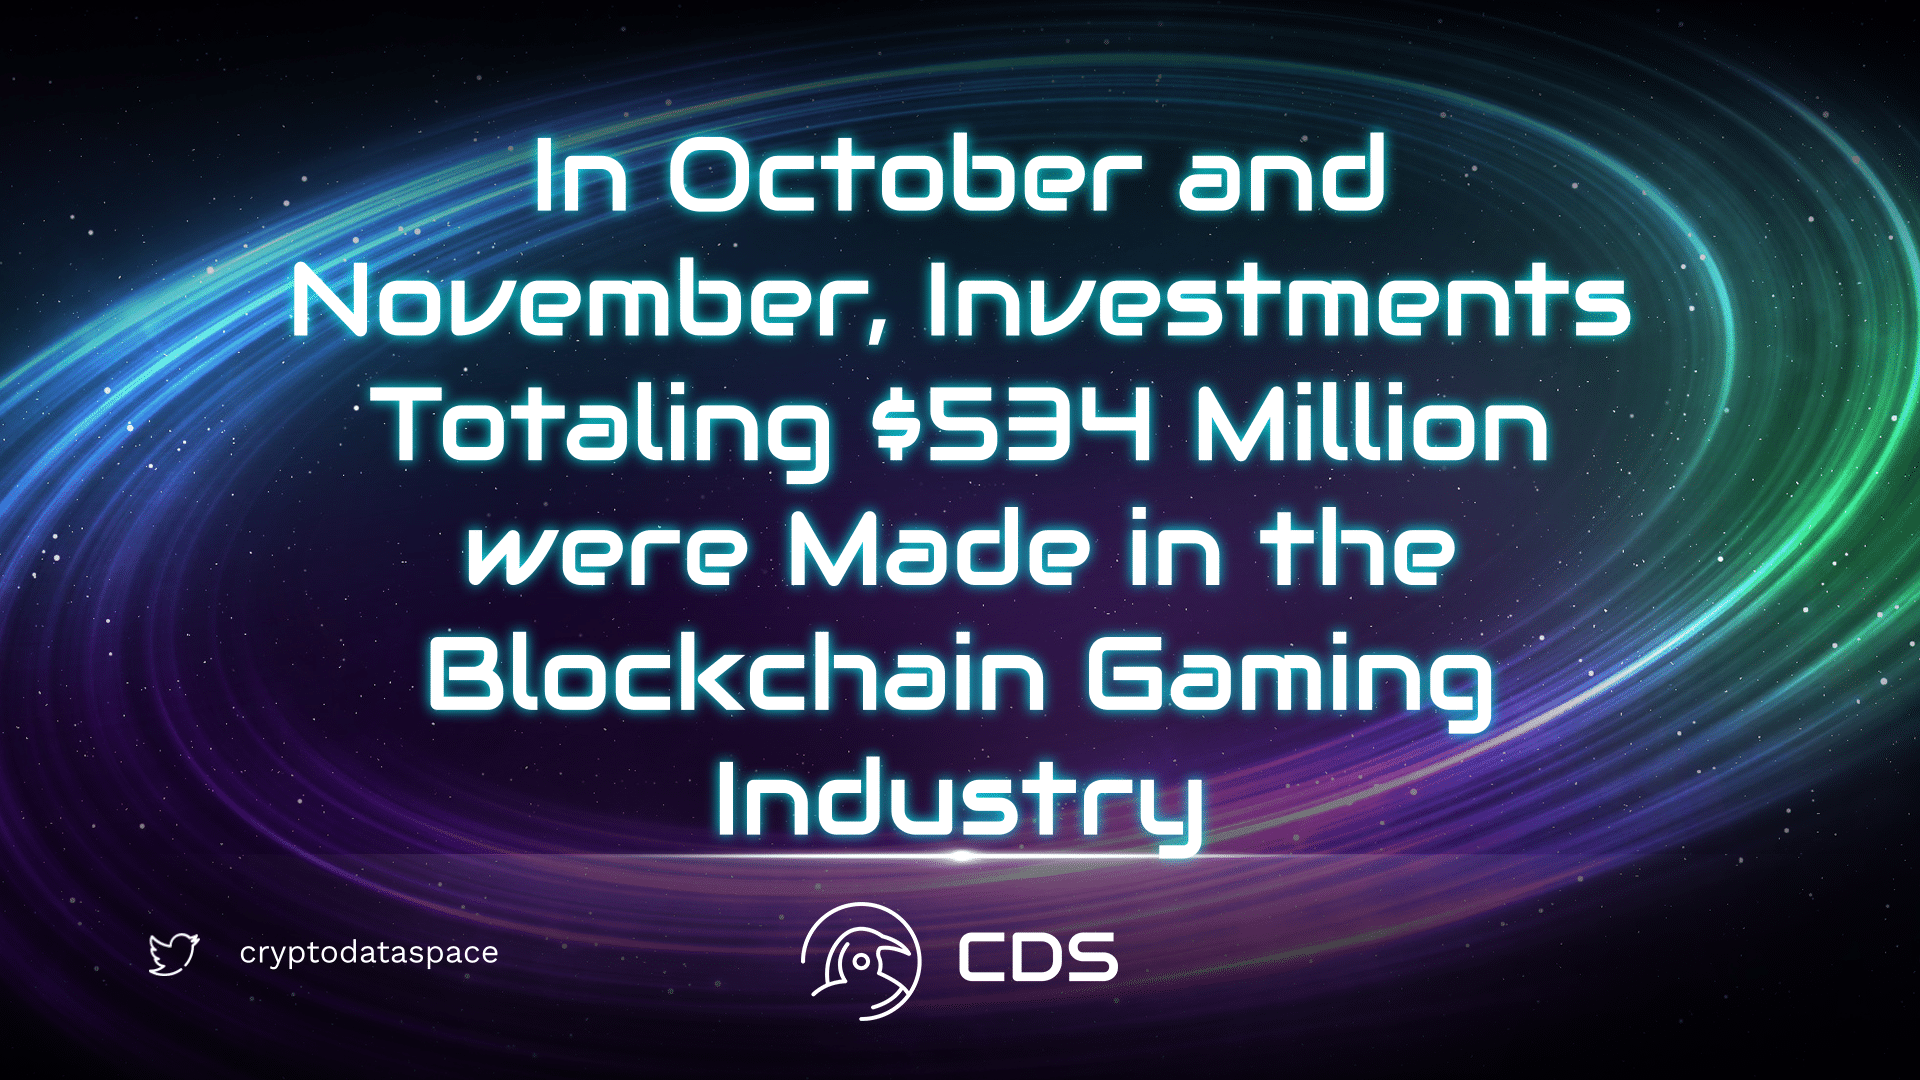 In October and November, Investments Totaling $534 Million were Made in the Blockchain Gaming Industry